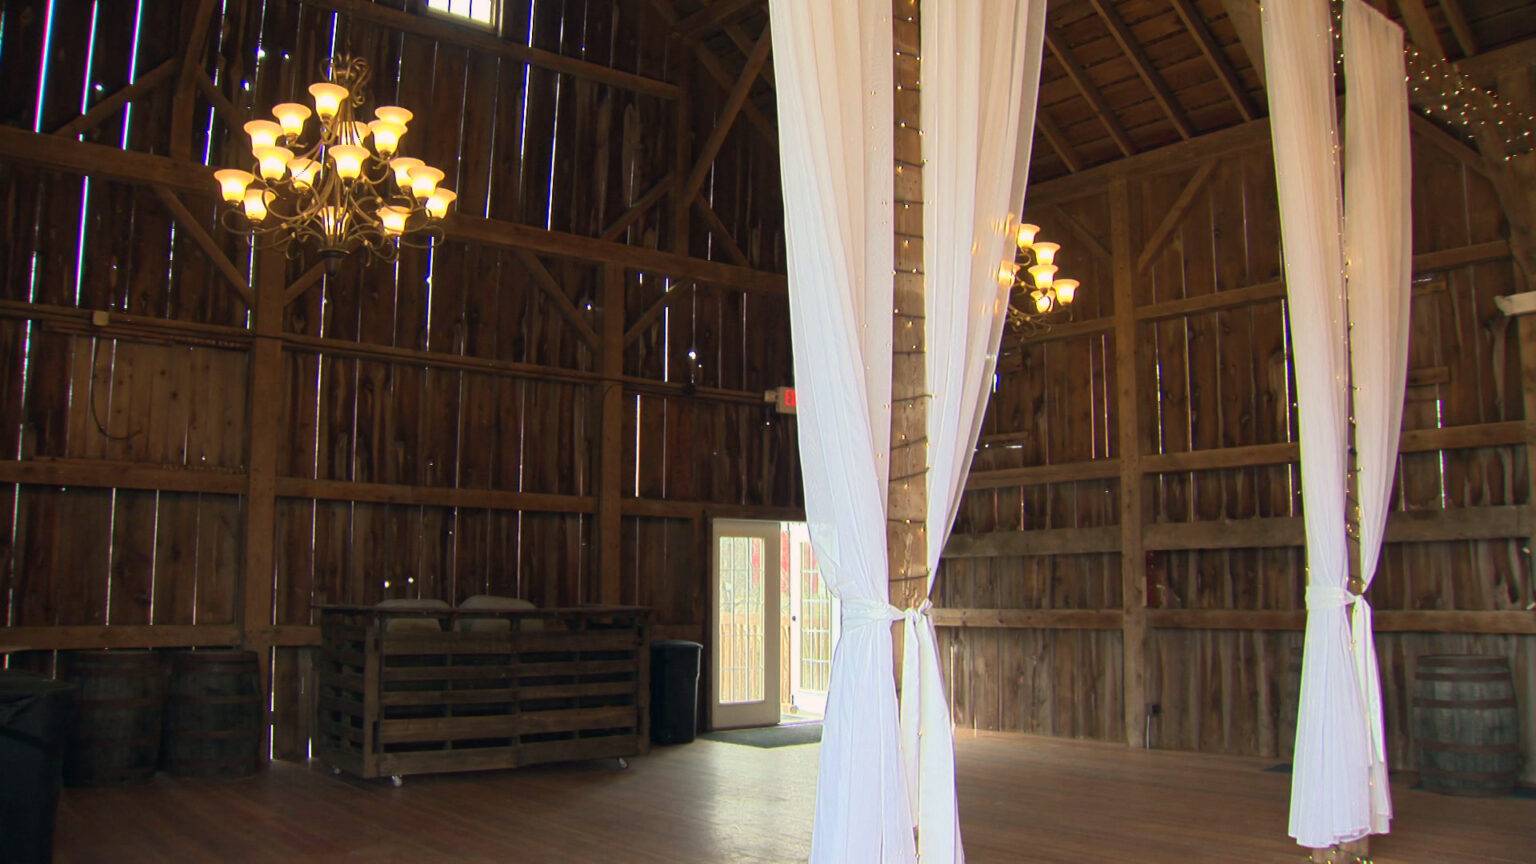 Metal chandeliers and long drapes hang from the rafters of the interior of a barn with wood-slat walls, with multiple barrels and a bar set against the rear wall next to an open door.